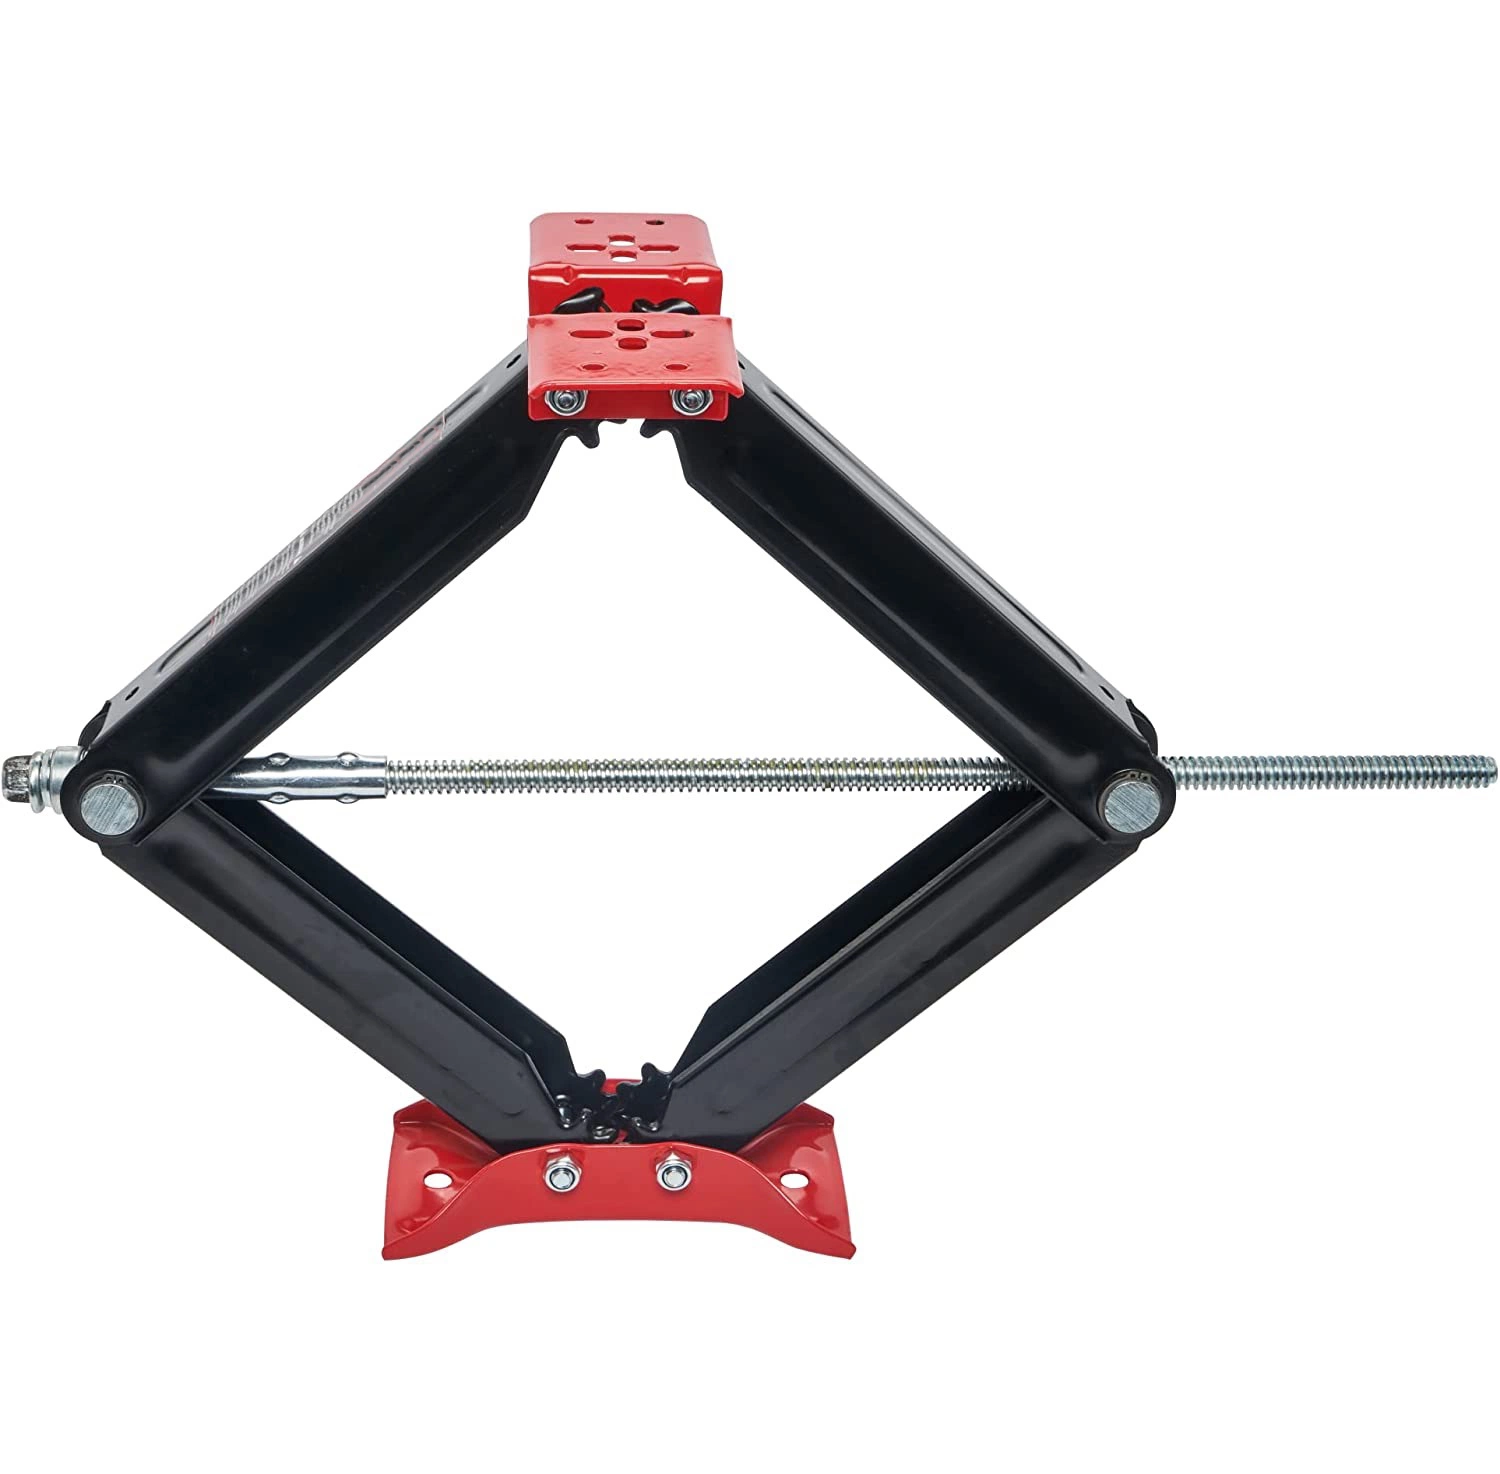 24" RV Trailer Stabilizer Leveling Scissor Jacks with Handle for Truck SUV Car Coupe Vehicle Camping Jack - 5000lbs - Set of 2